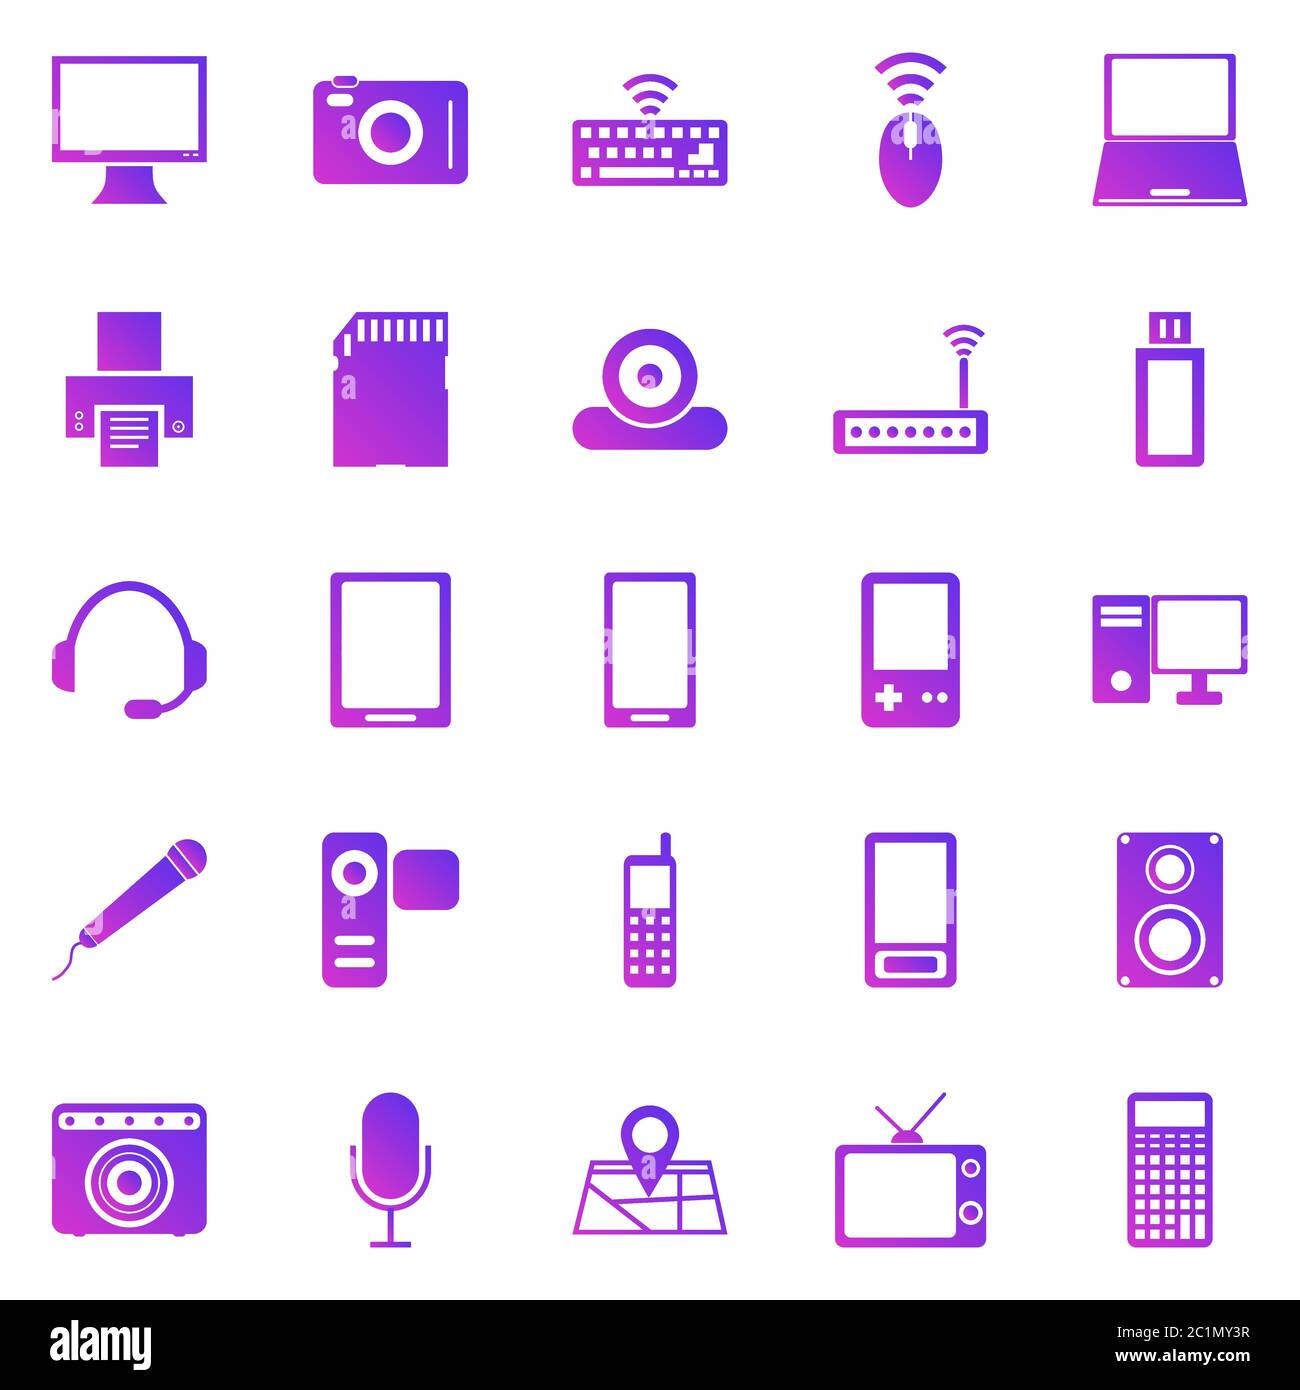 Gadget gradient icons on white background, stock vector Stock Vector